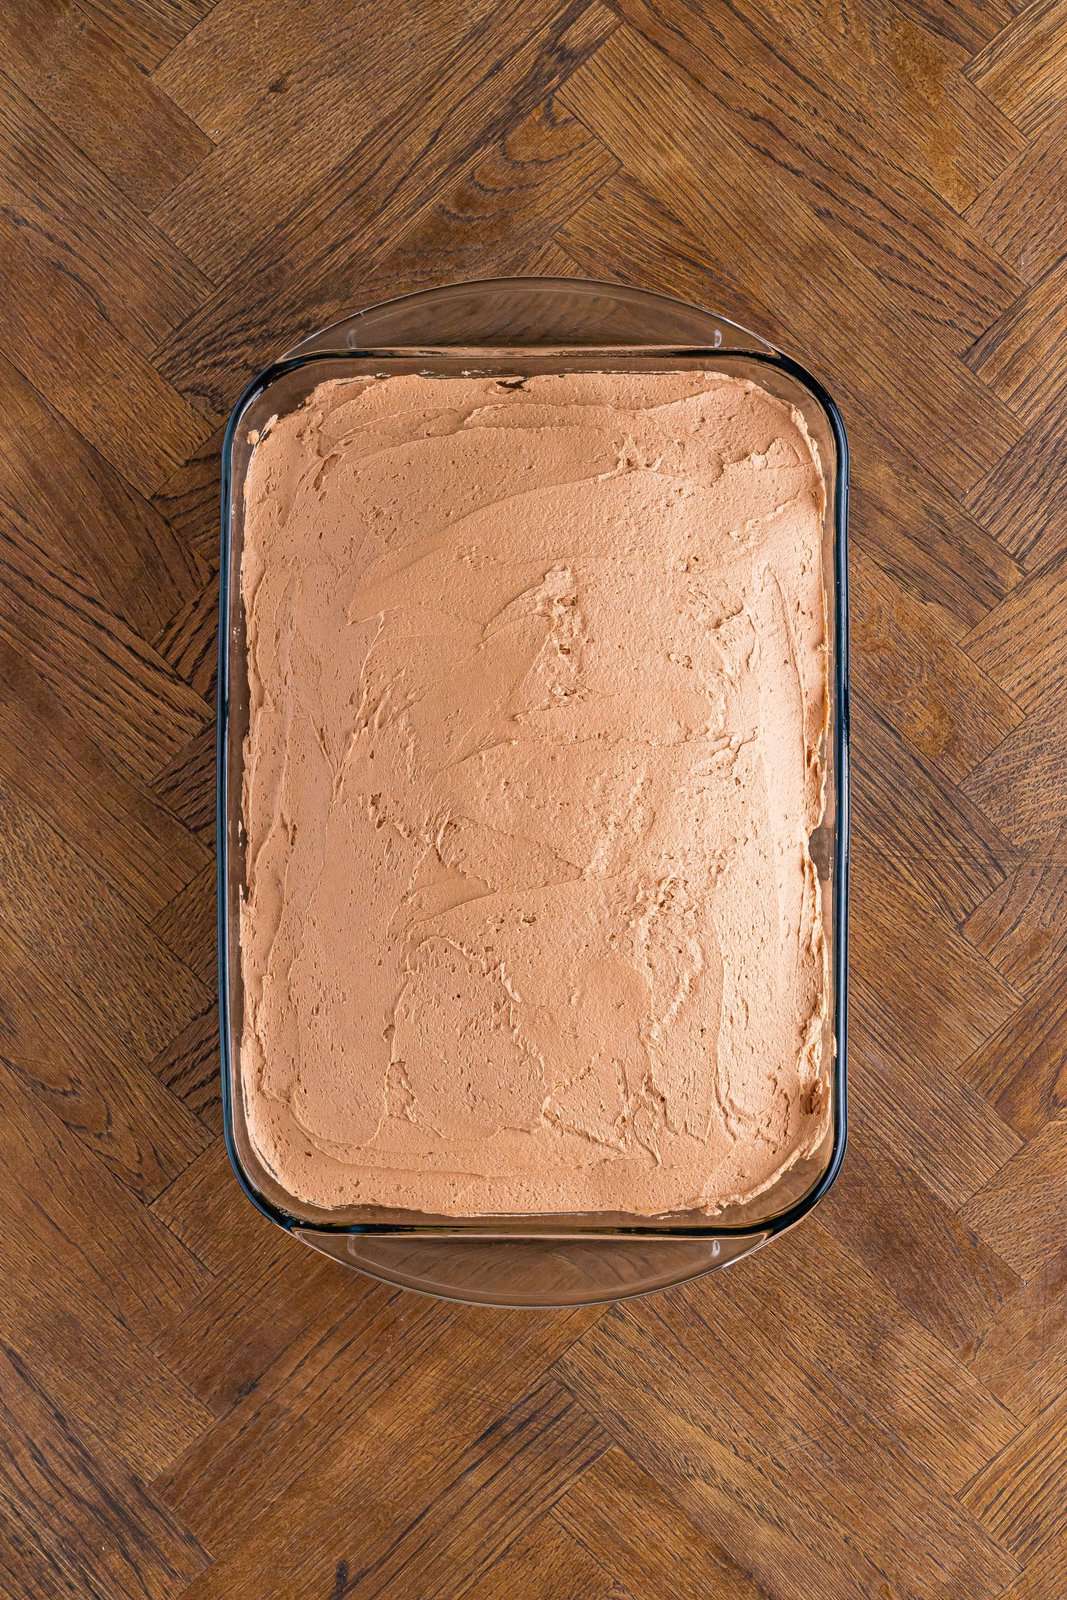 A chocolate cake with chocolate frosting. 